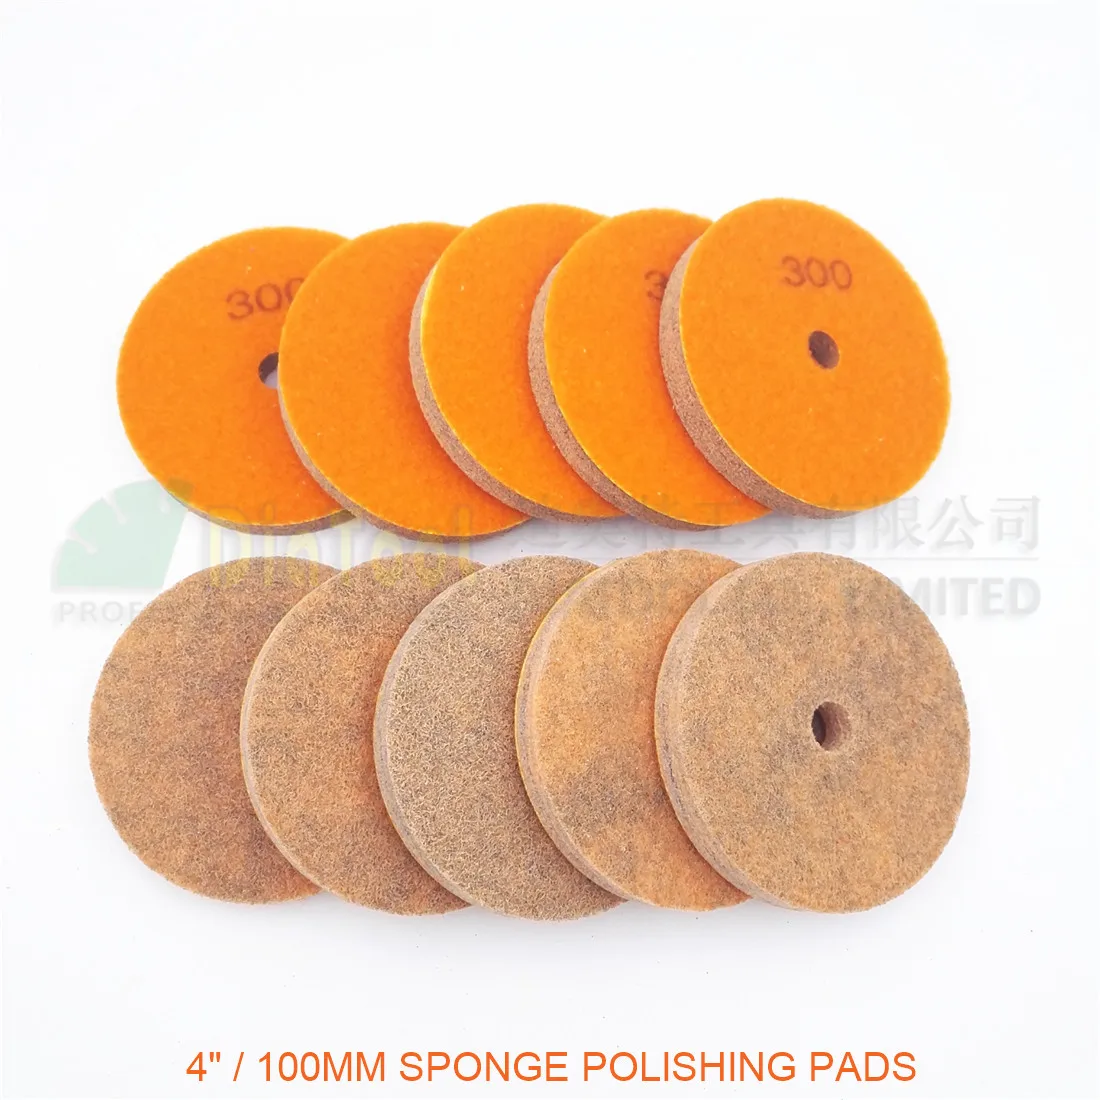 DIATOOL 10pcs 4inches Diamond Sponge Polishing Pads For Soft Stone Marble Artificial Stone Terrazzo Grit #300 Diameter 100MM dt diatool 1pc dia102mm m14 thread laser welded diamond dry drilling core bit for granite marble nature stone drill bit hole saw